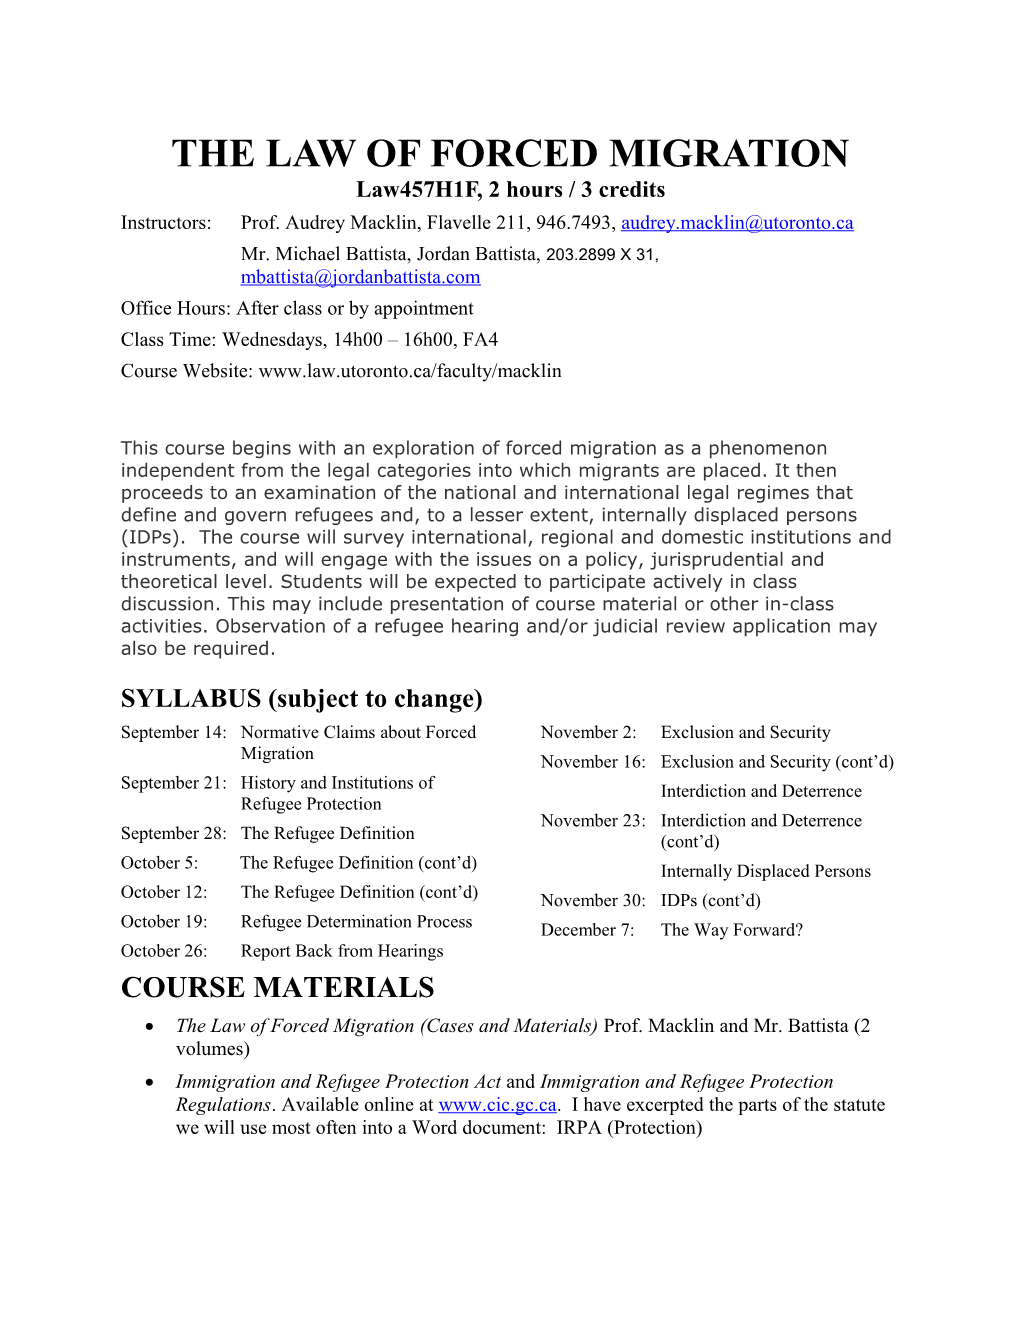 THE LAW of FORCED MIGRATION Law457h1f, 2 Hours / 3 Credits